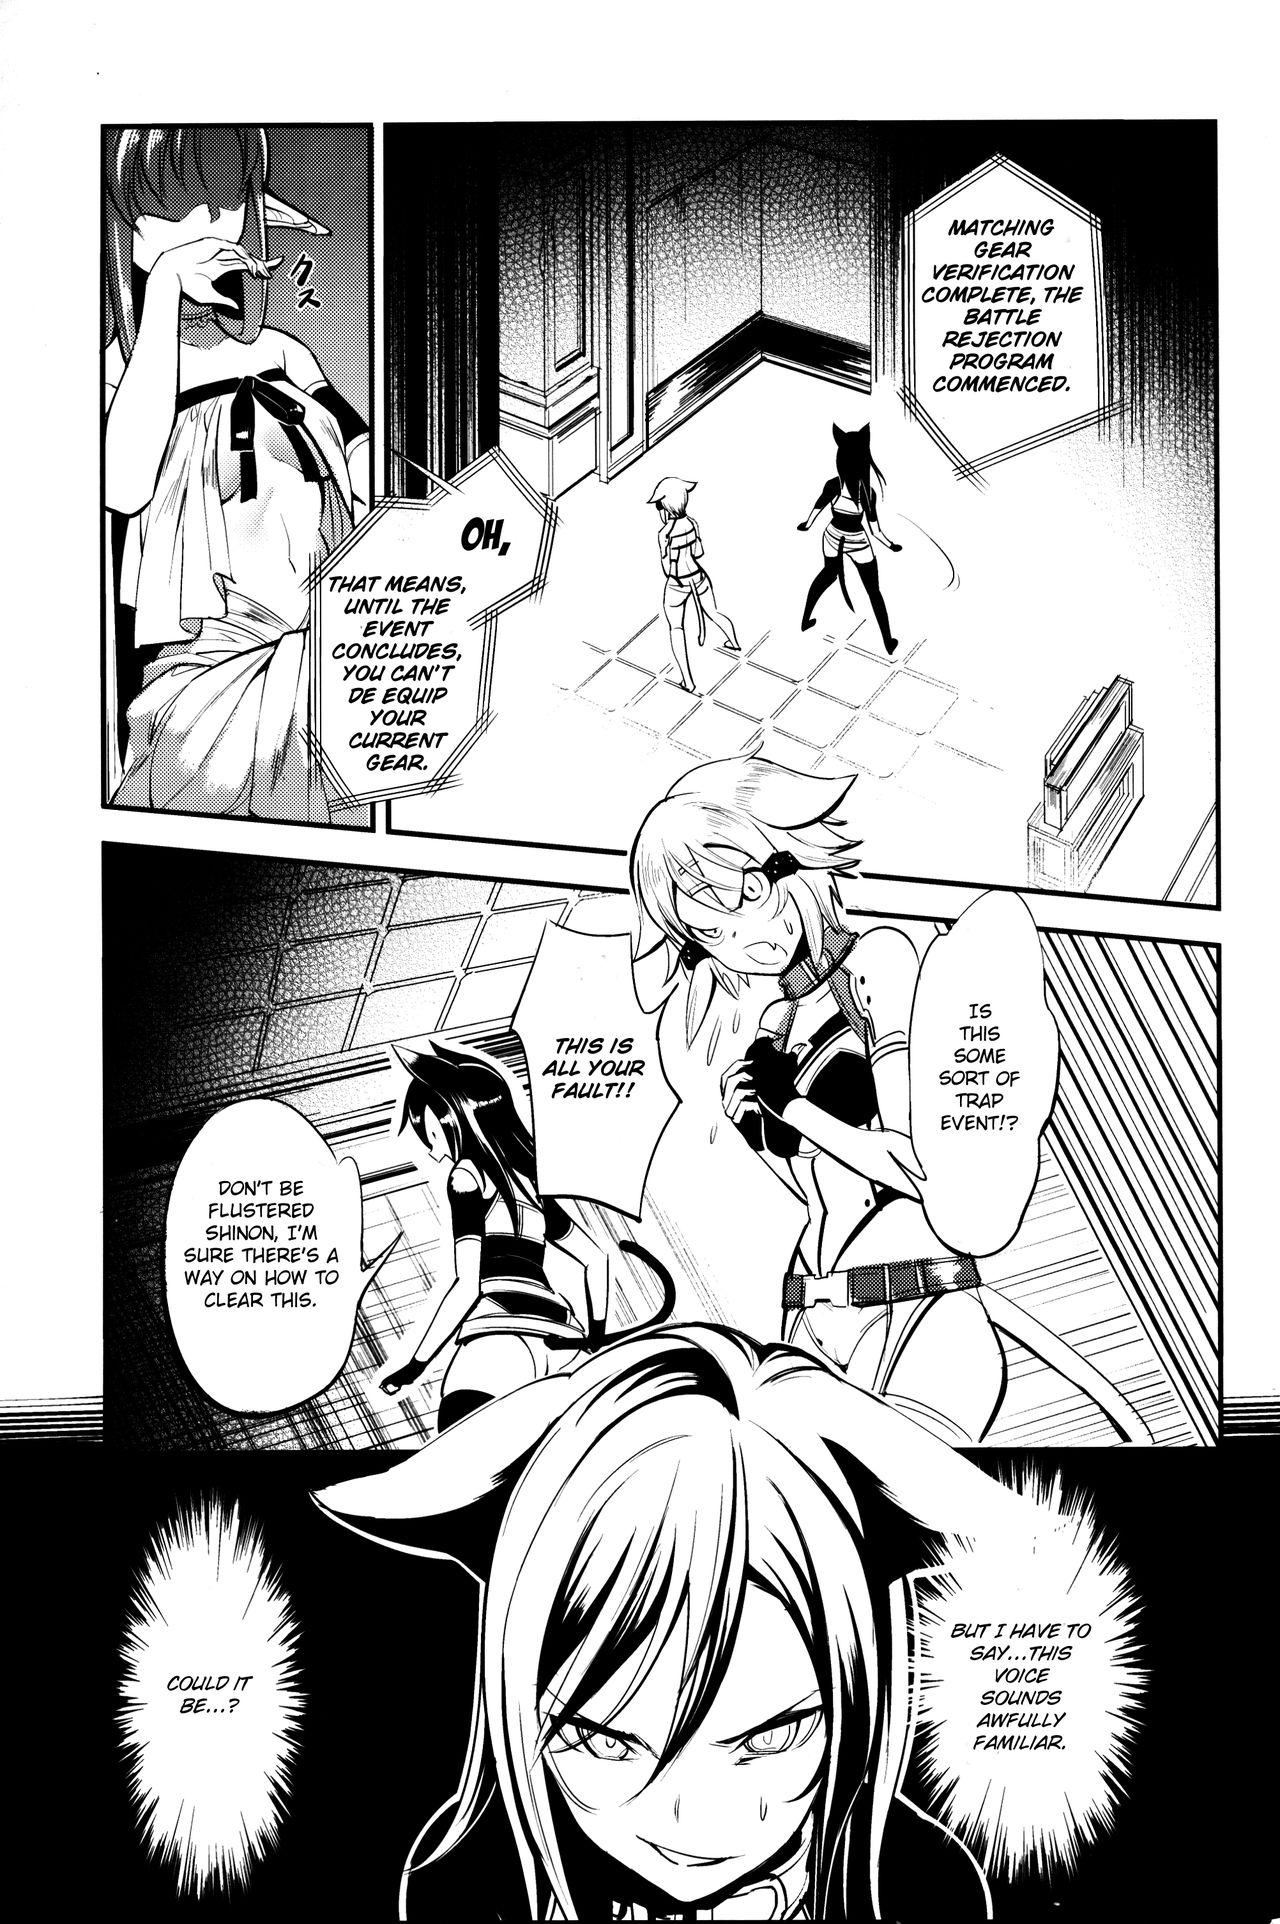 Culos MONSTER HOUSE QUEST - Sword art online Gay Bondage - Page 4